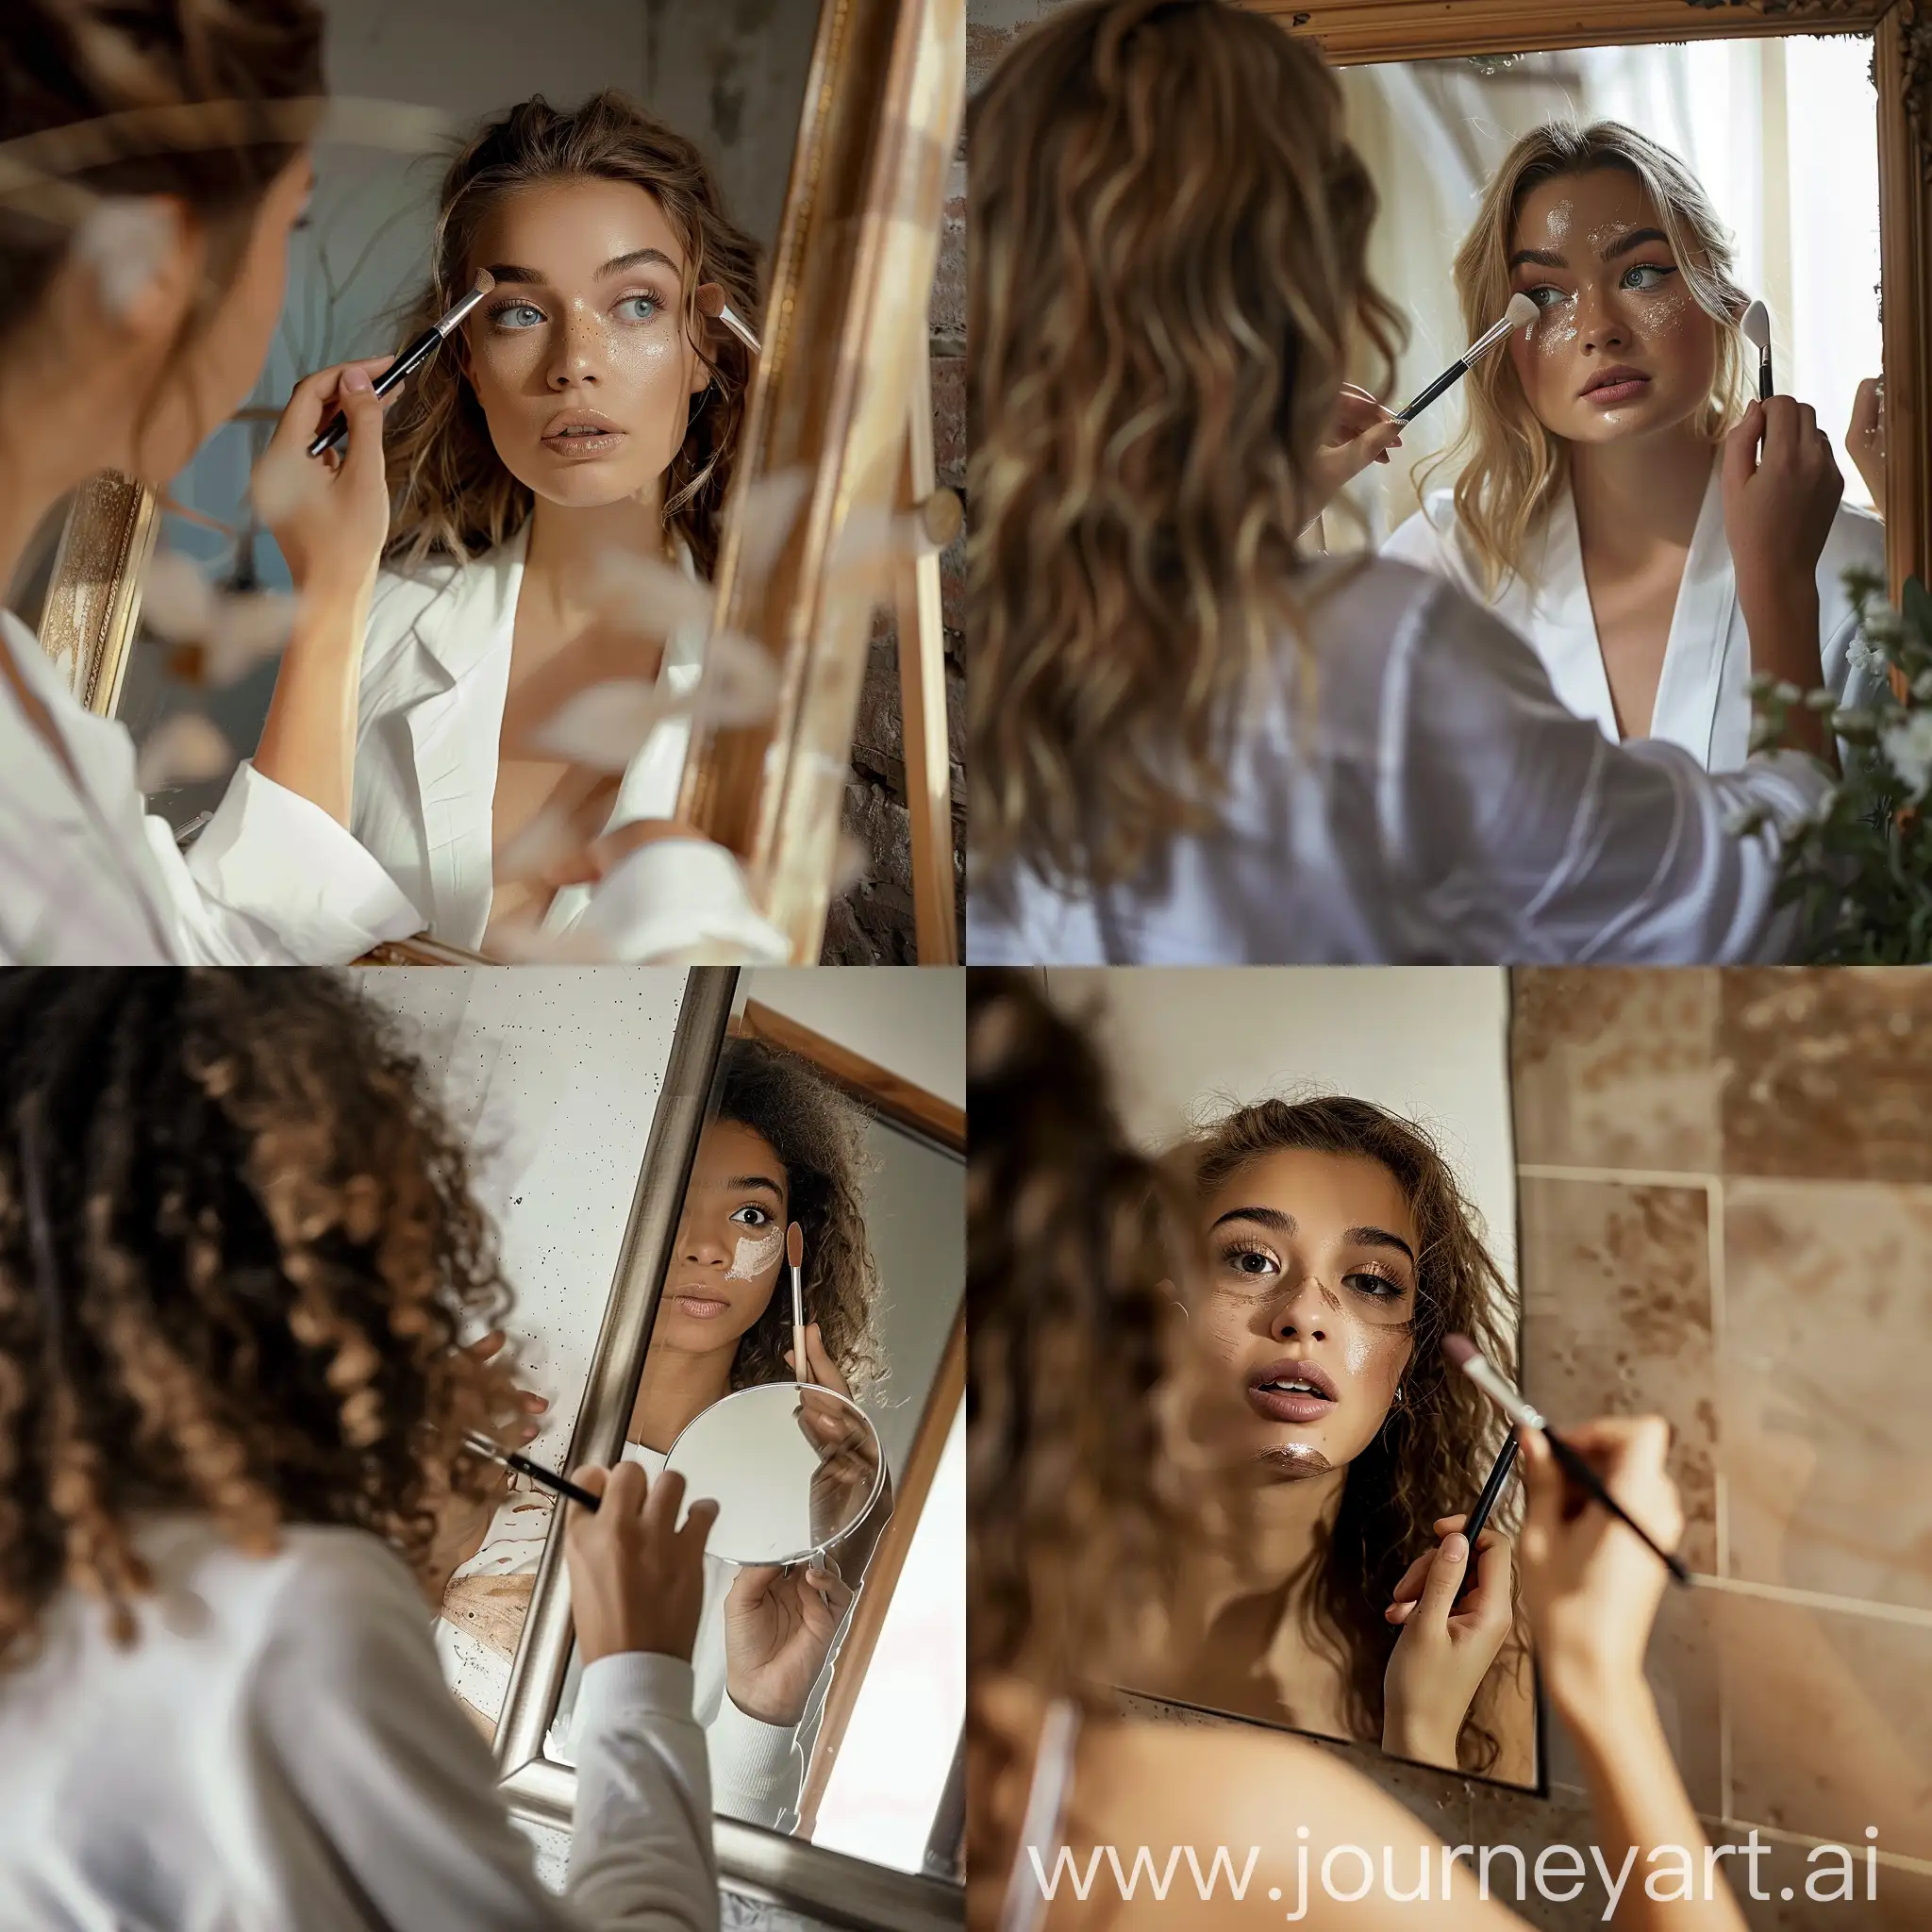 a cou looking in the mirror and putting makeup